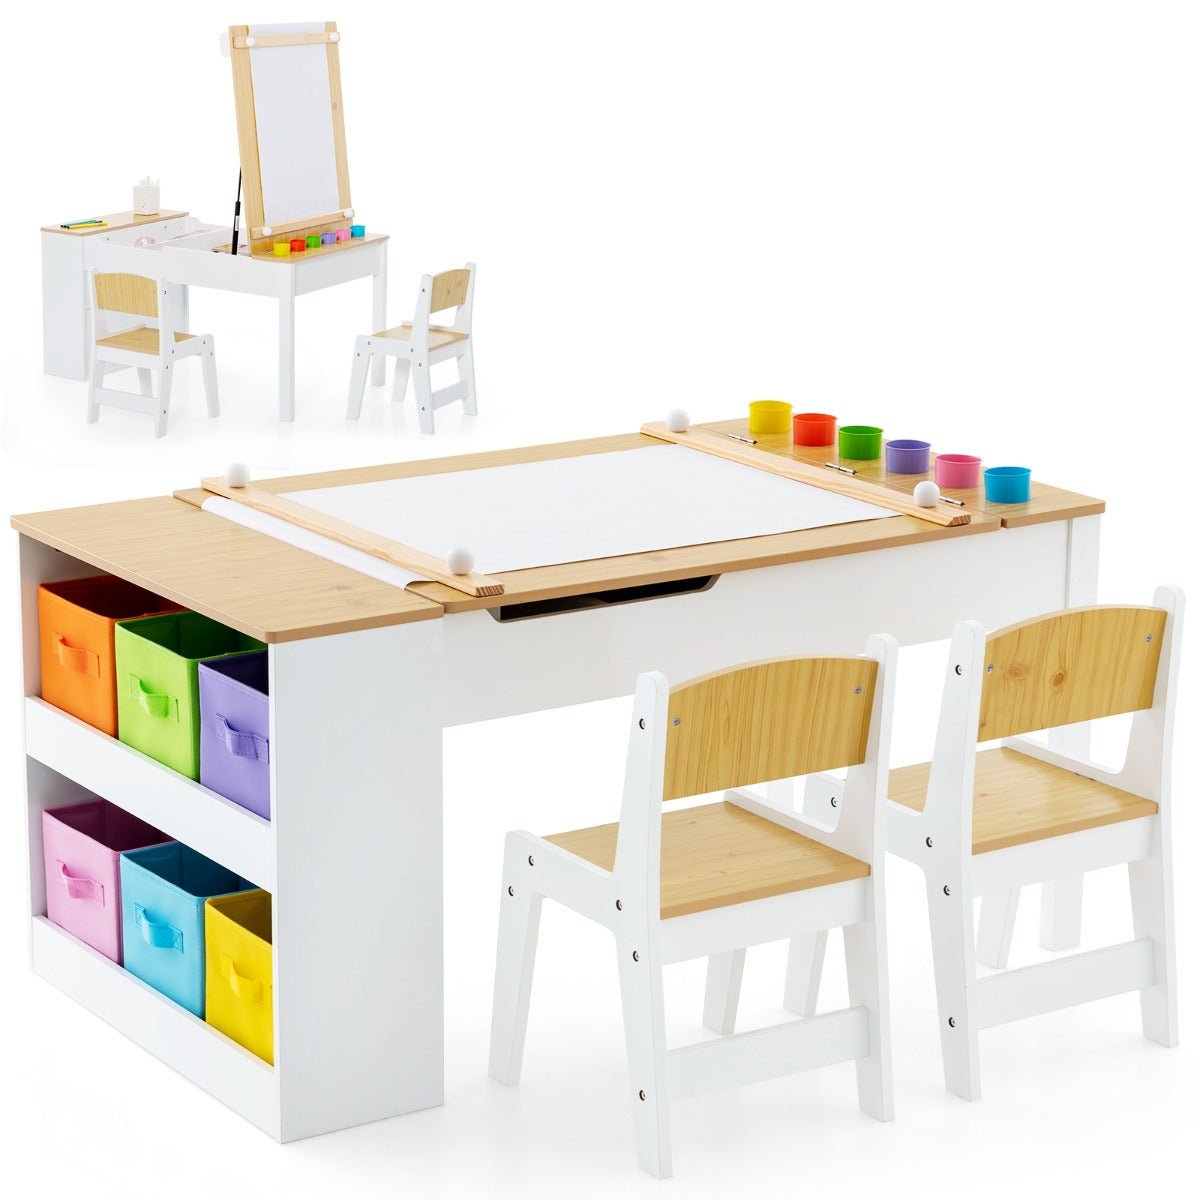 Kids Art Easel and Table Set with Canvas Storage